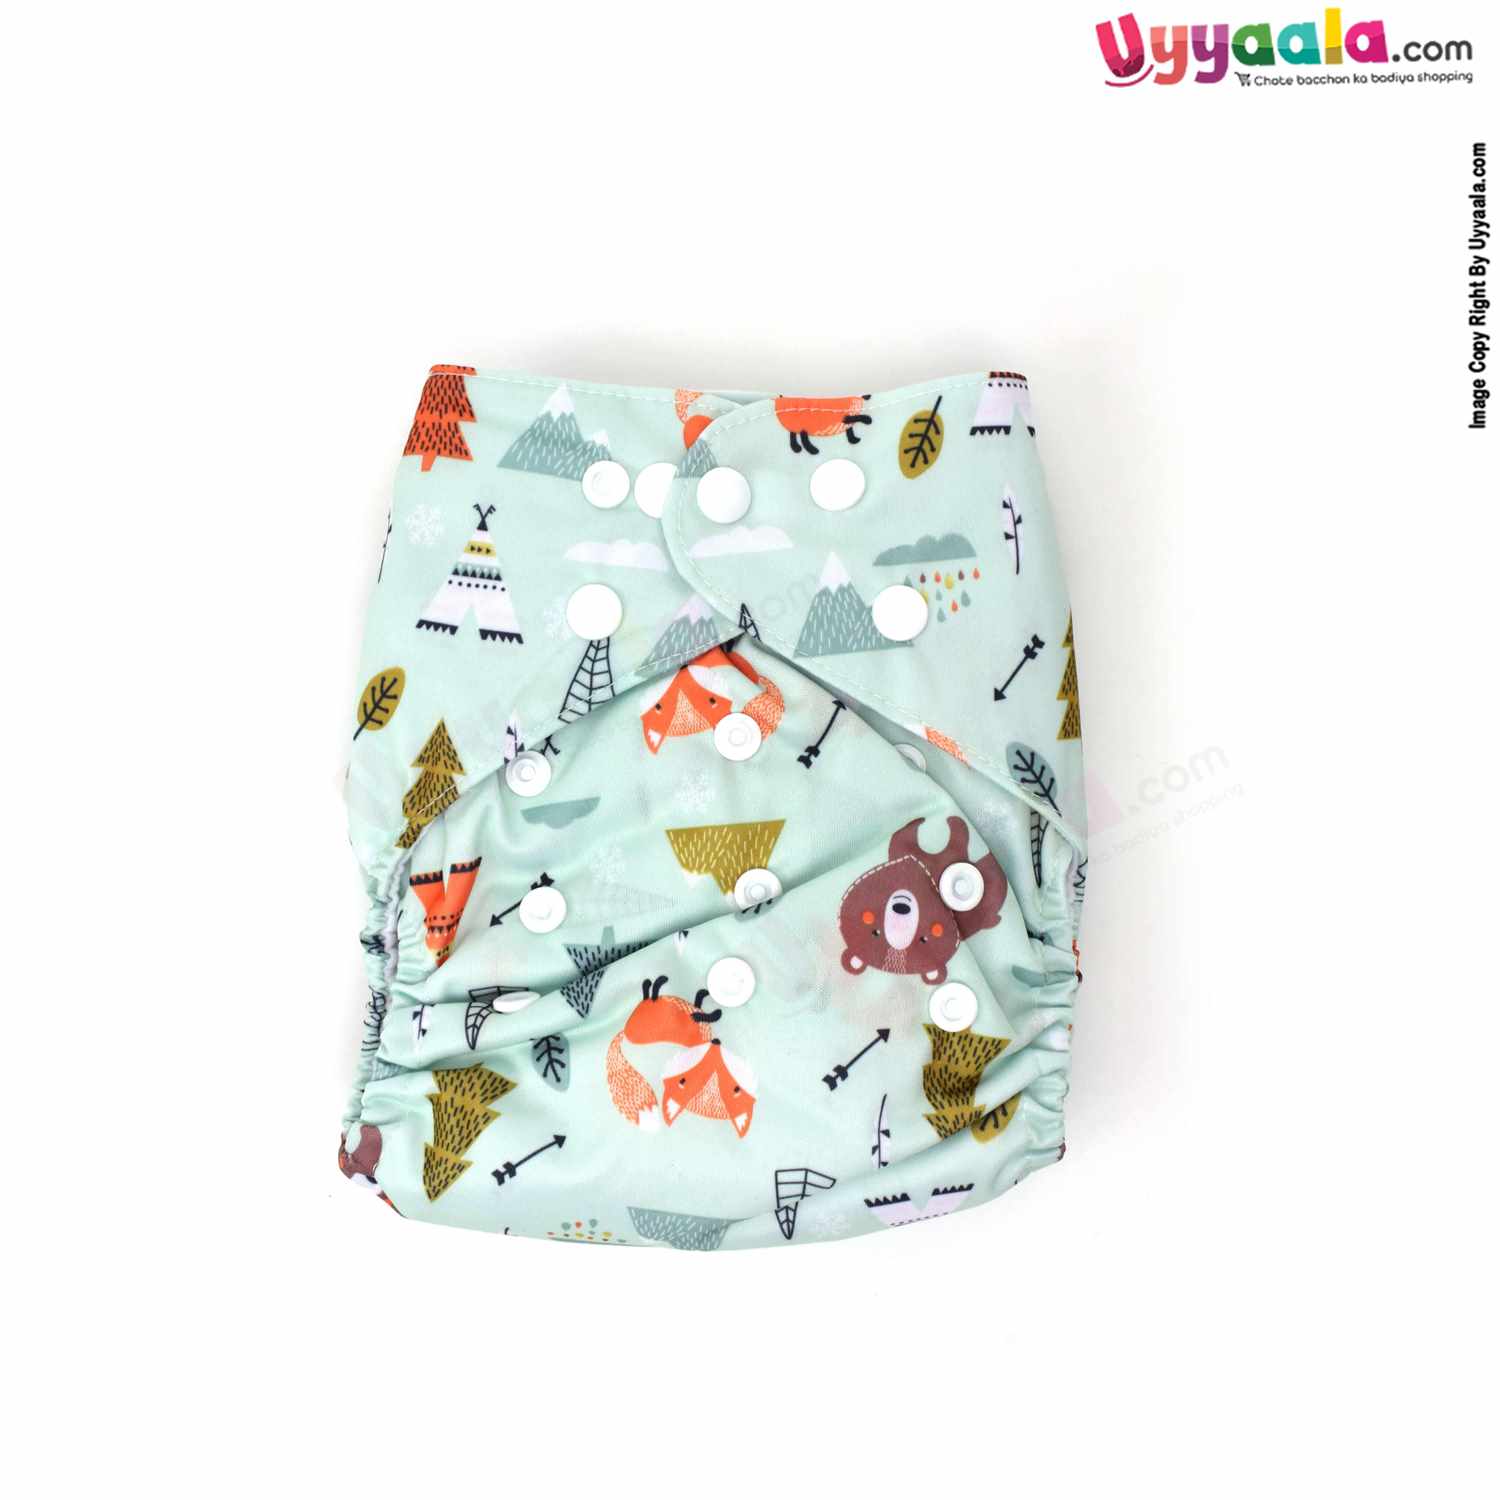 KICKS & CRAWL Re-Usable Cloth Diaper with Single Nappy Pad & Button Adjustable Polyester Fabric, Animals & Trees Print, 0-24m Age - Light Green